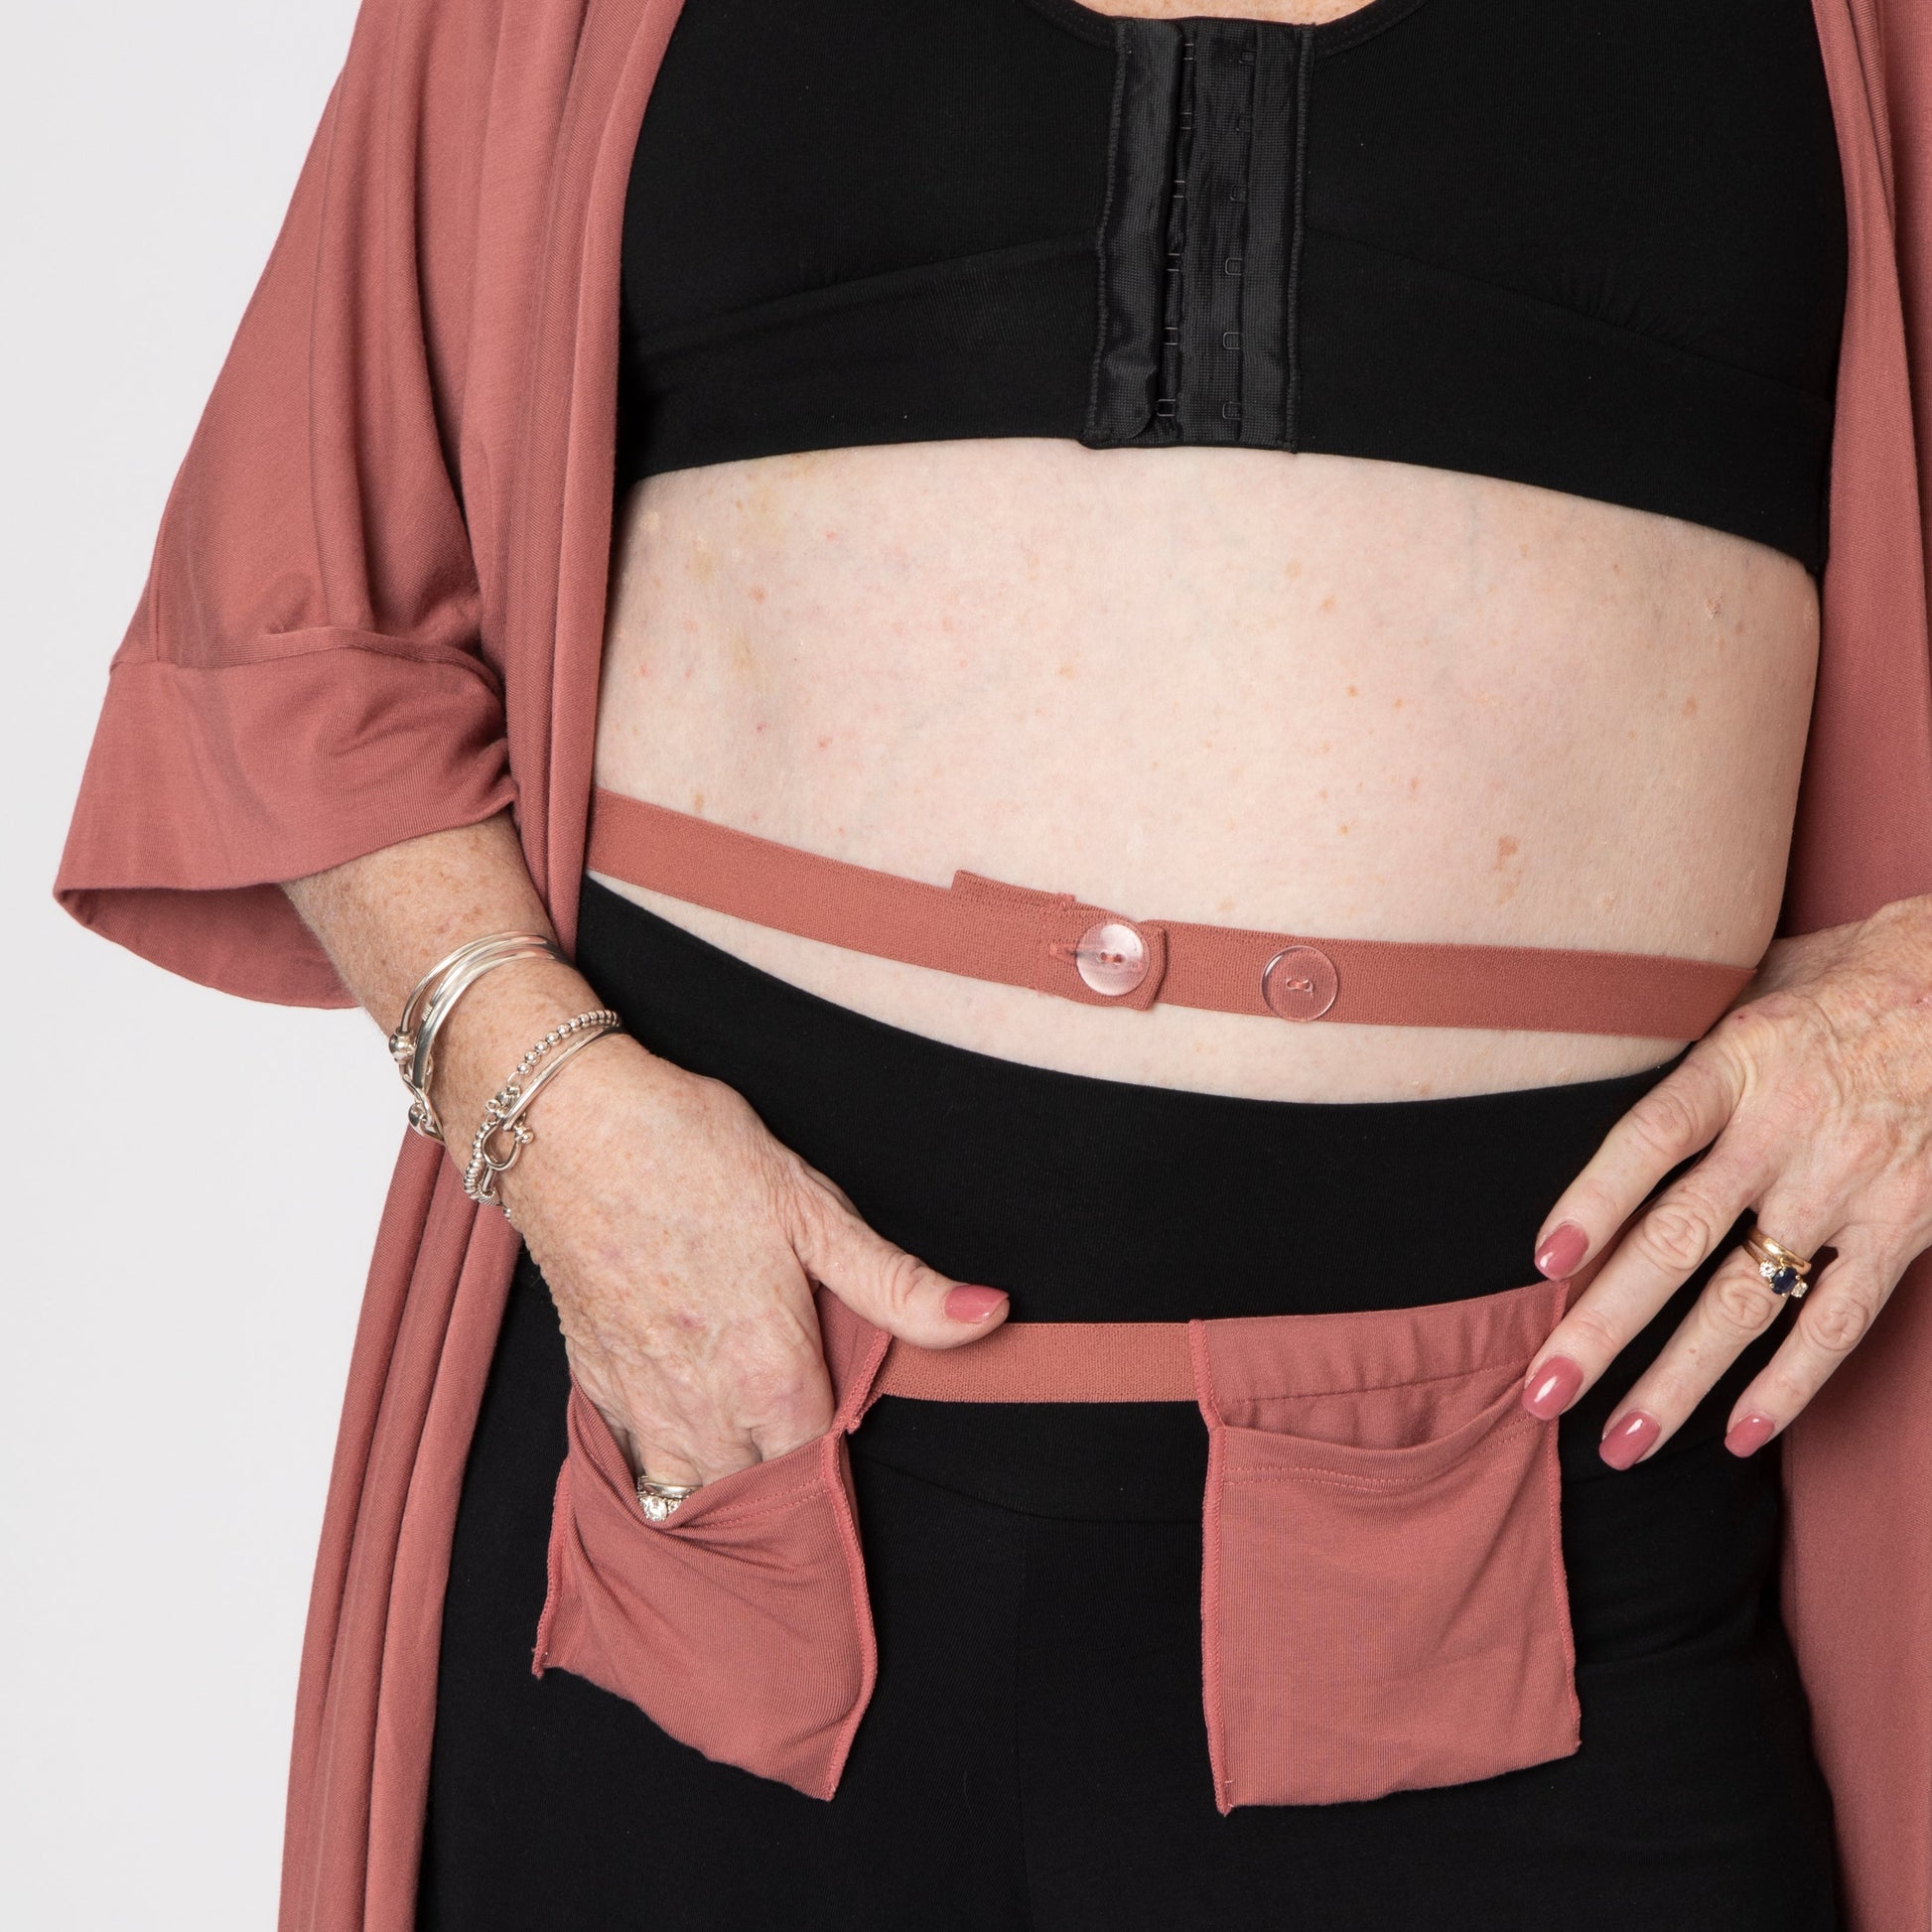 Miena Robe with Drain Management Belt in dusky rose, from Anaono